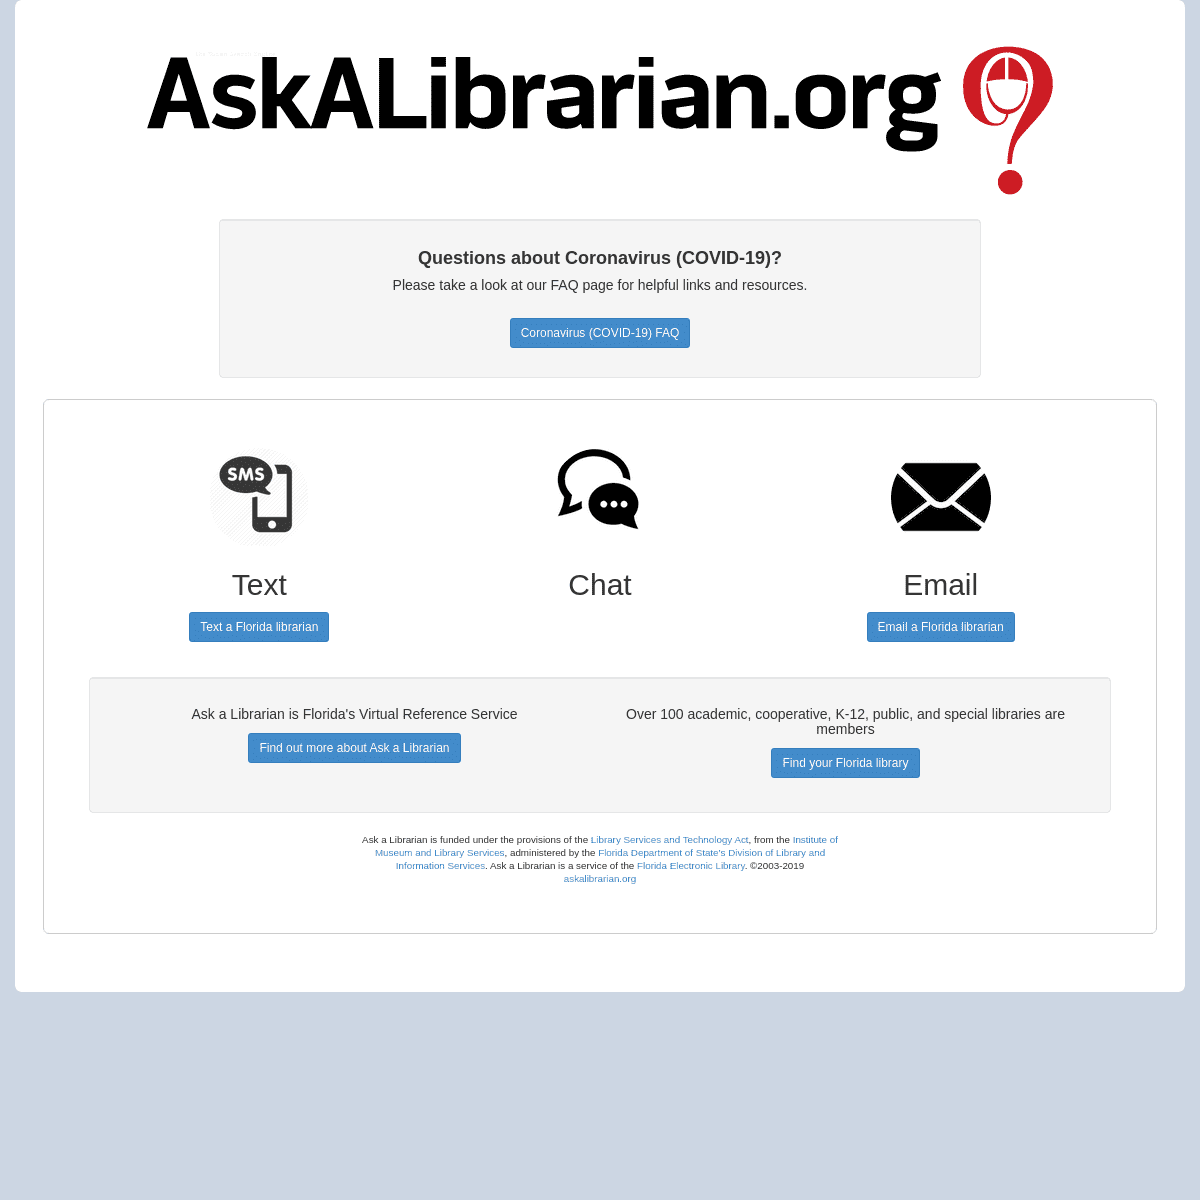 A complete backup of https://askalibrarian.org